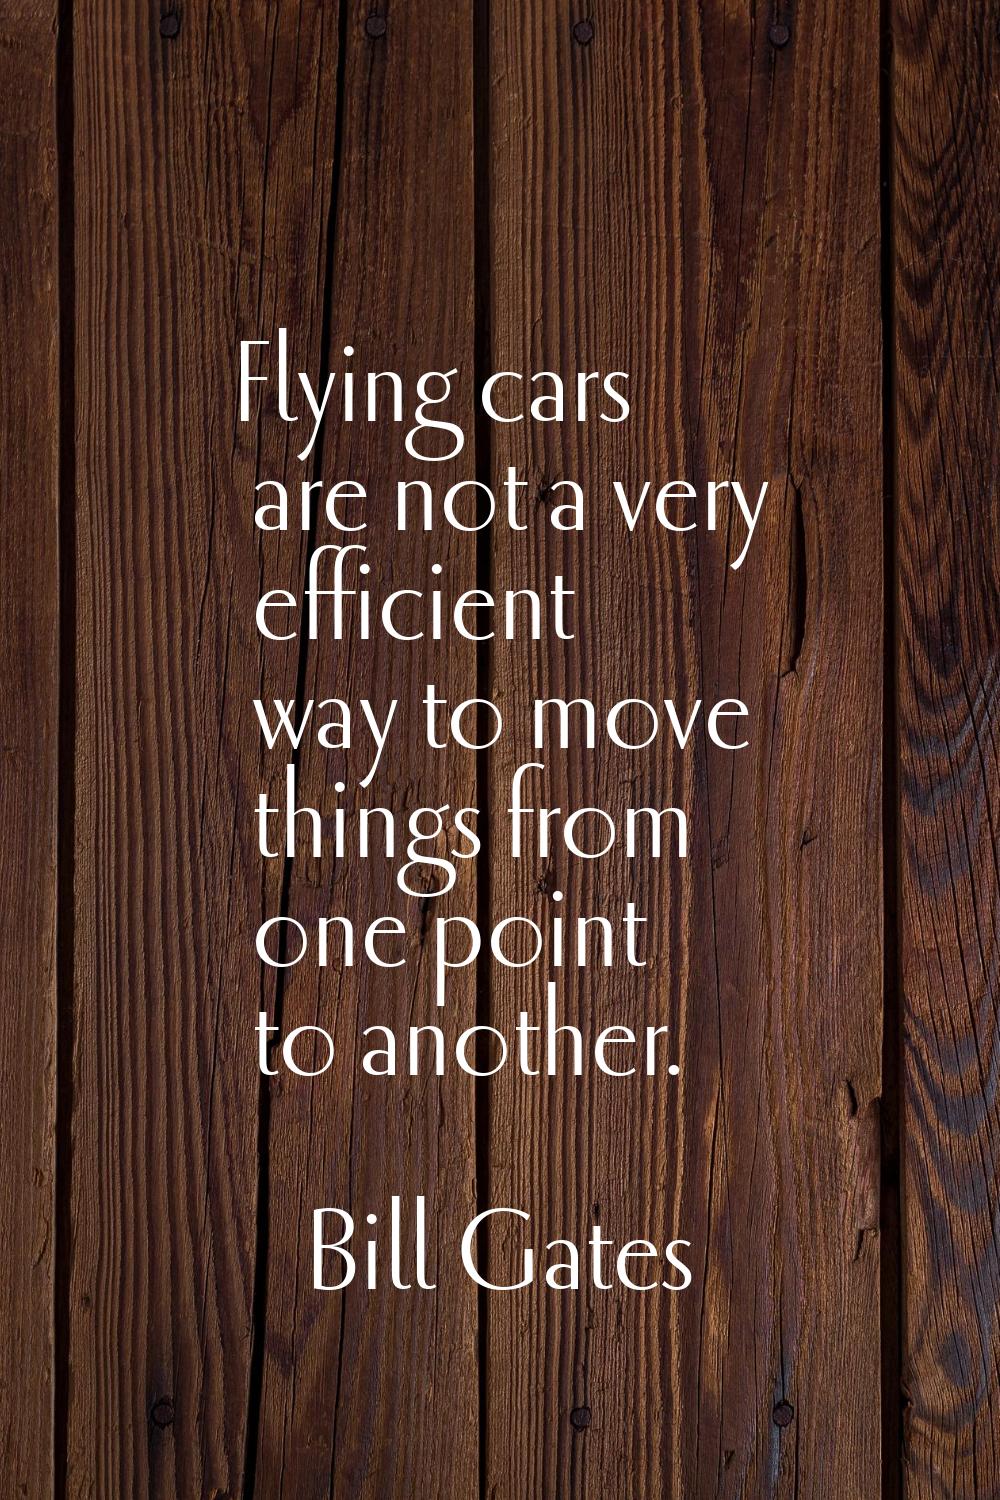 Flying cars are not a very efficient way to move things from one point to another.